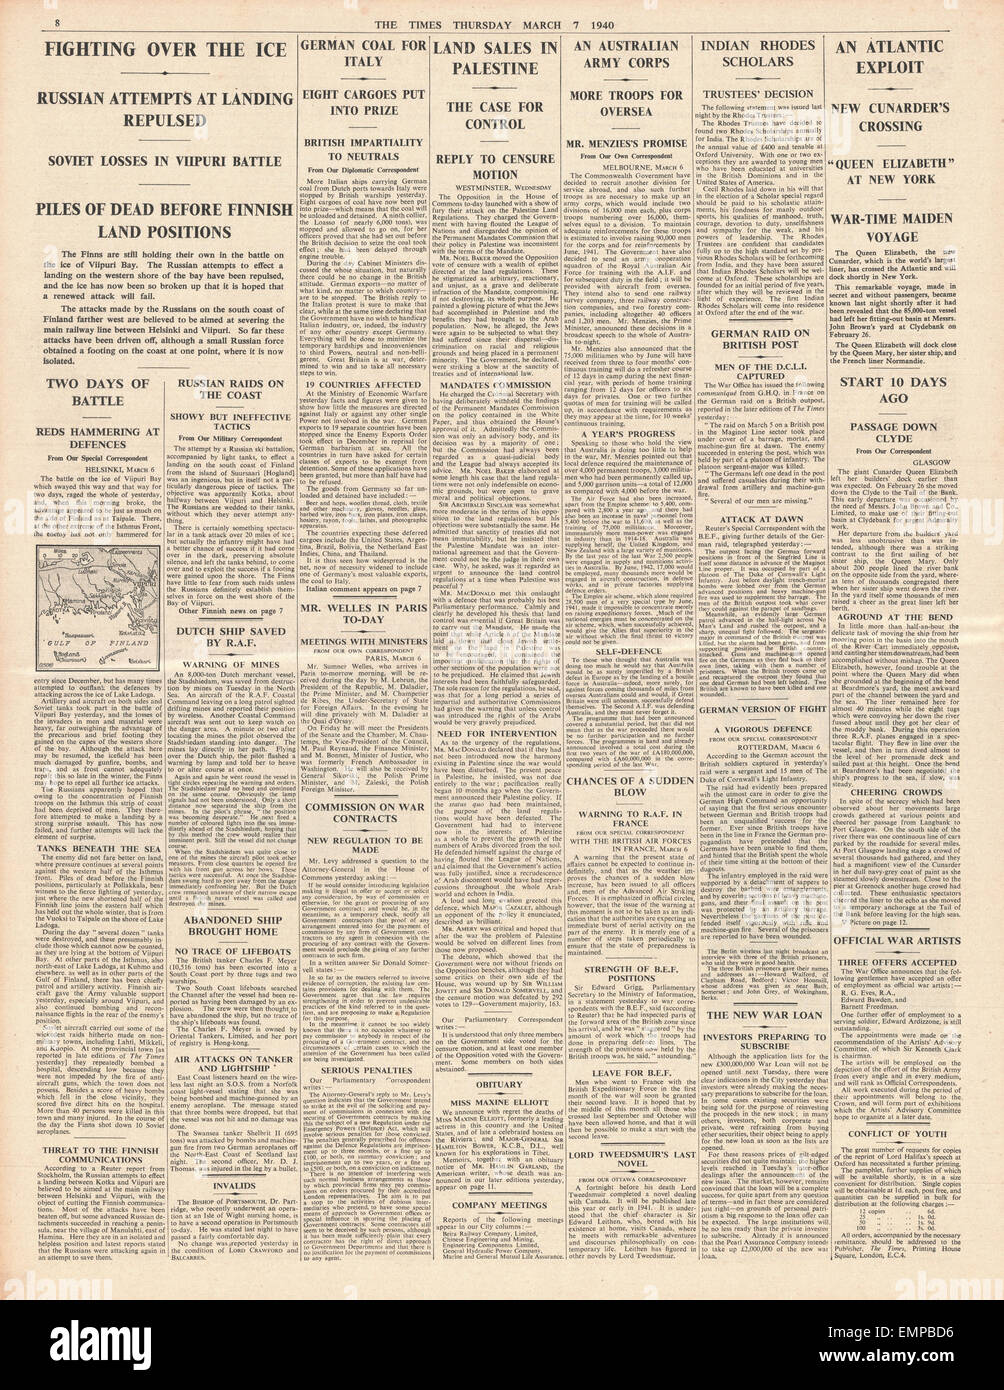 1940 page 8 The Times Battle for Viipuri Bay in Finland, Coal embargo in Italy, Liner Queen Elizabeth crosses Atlantic to New Stock Photo